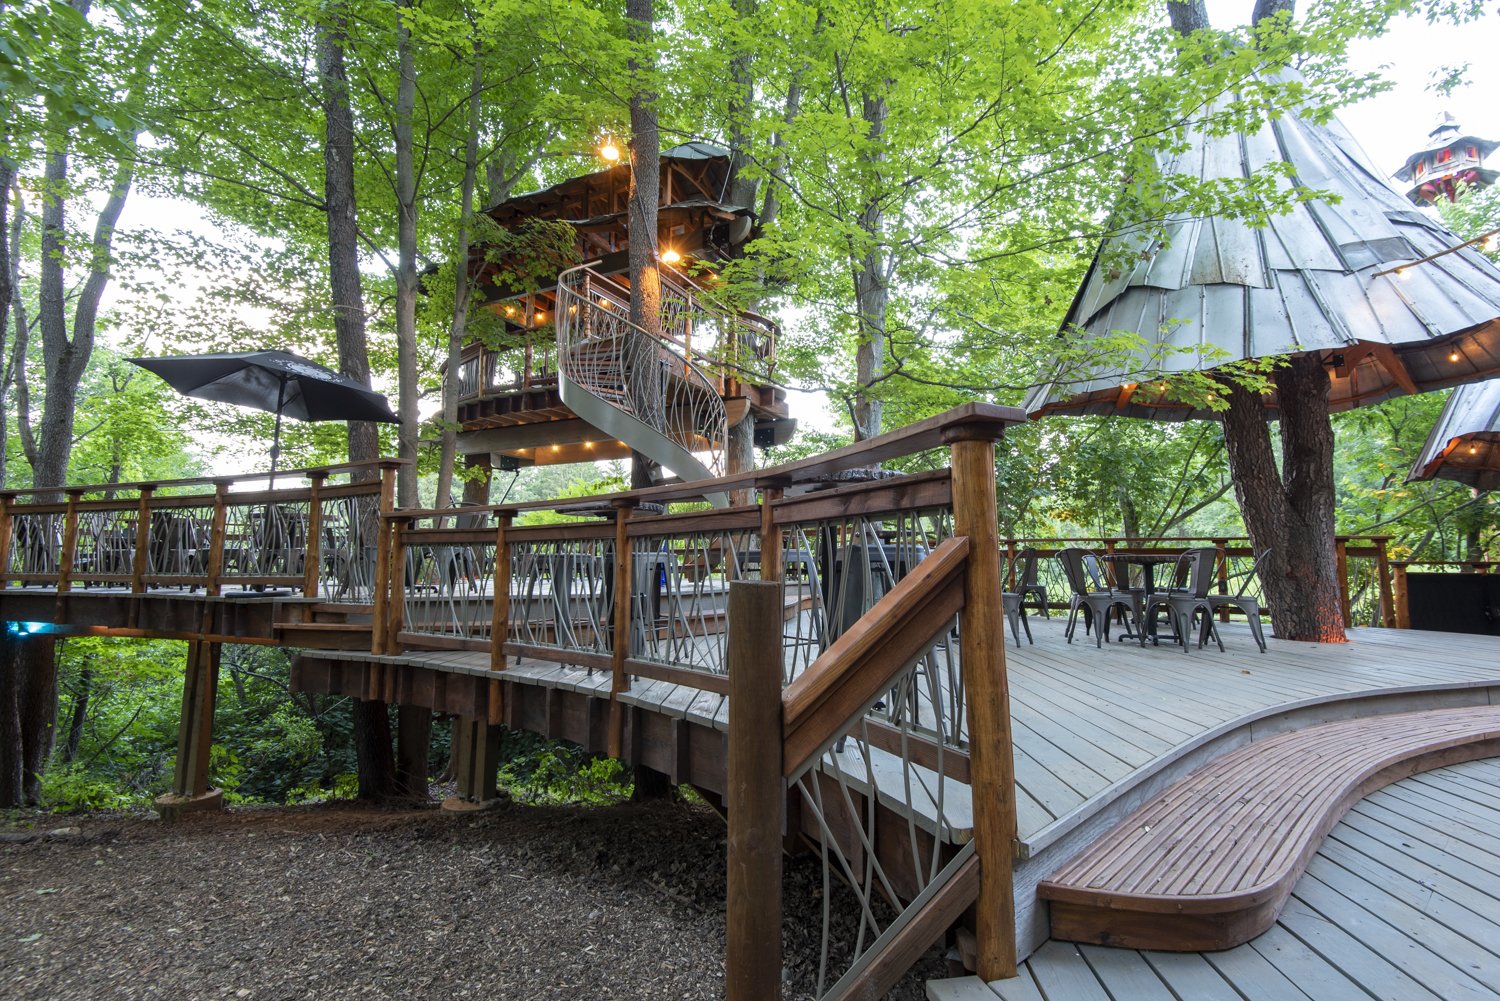 Side view of Treehouse Cafe